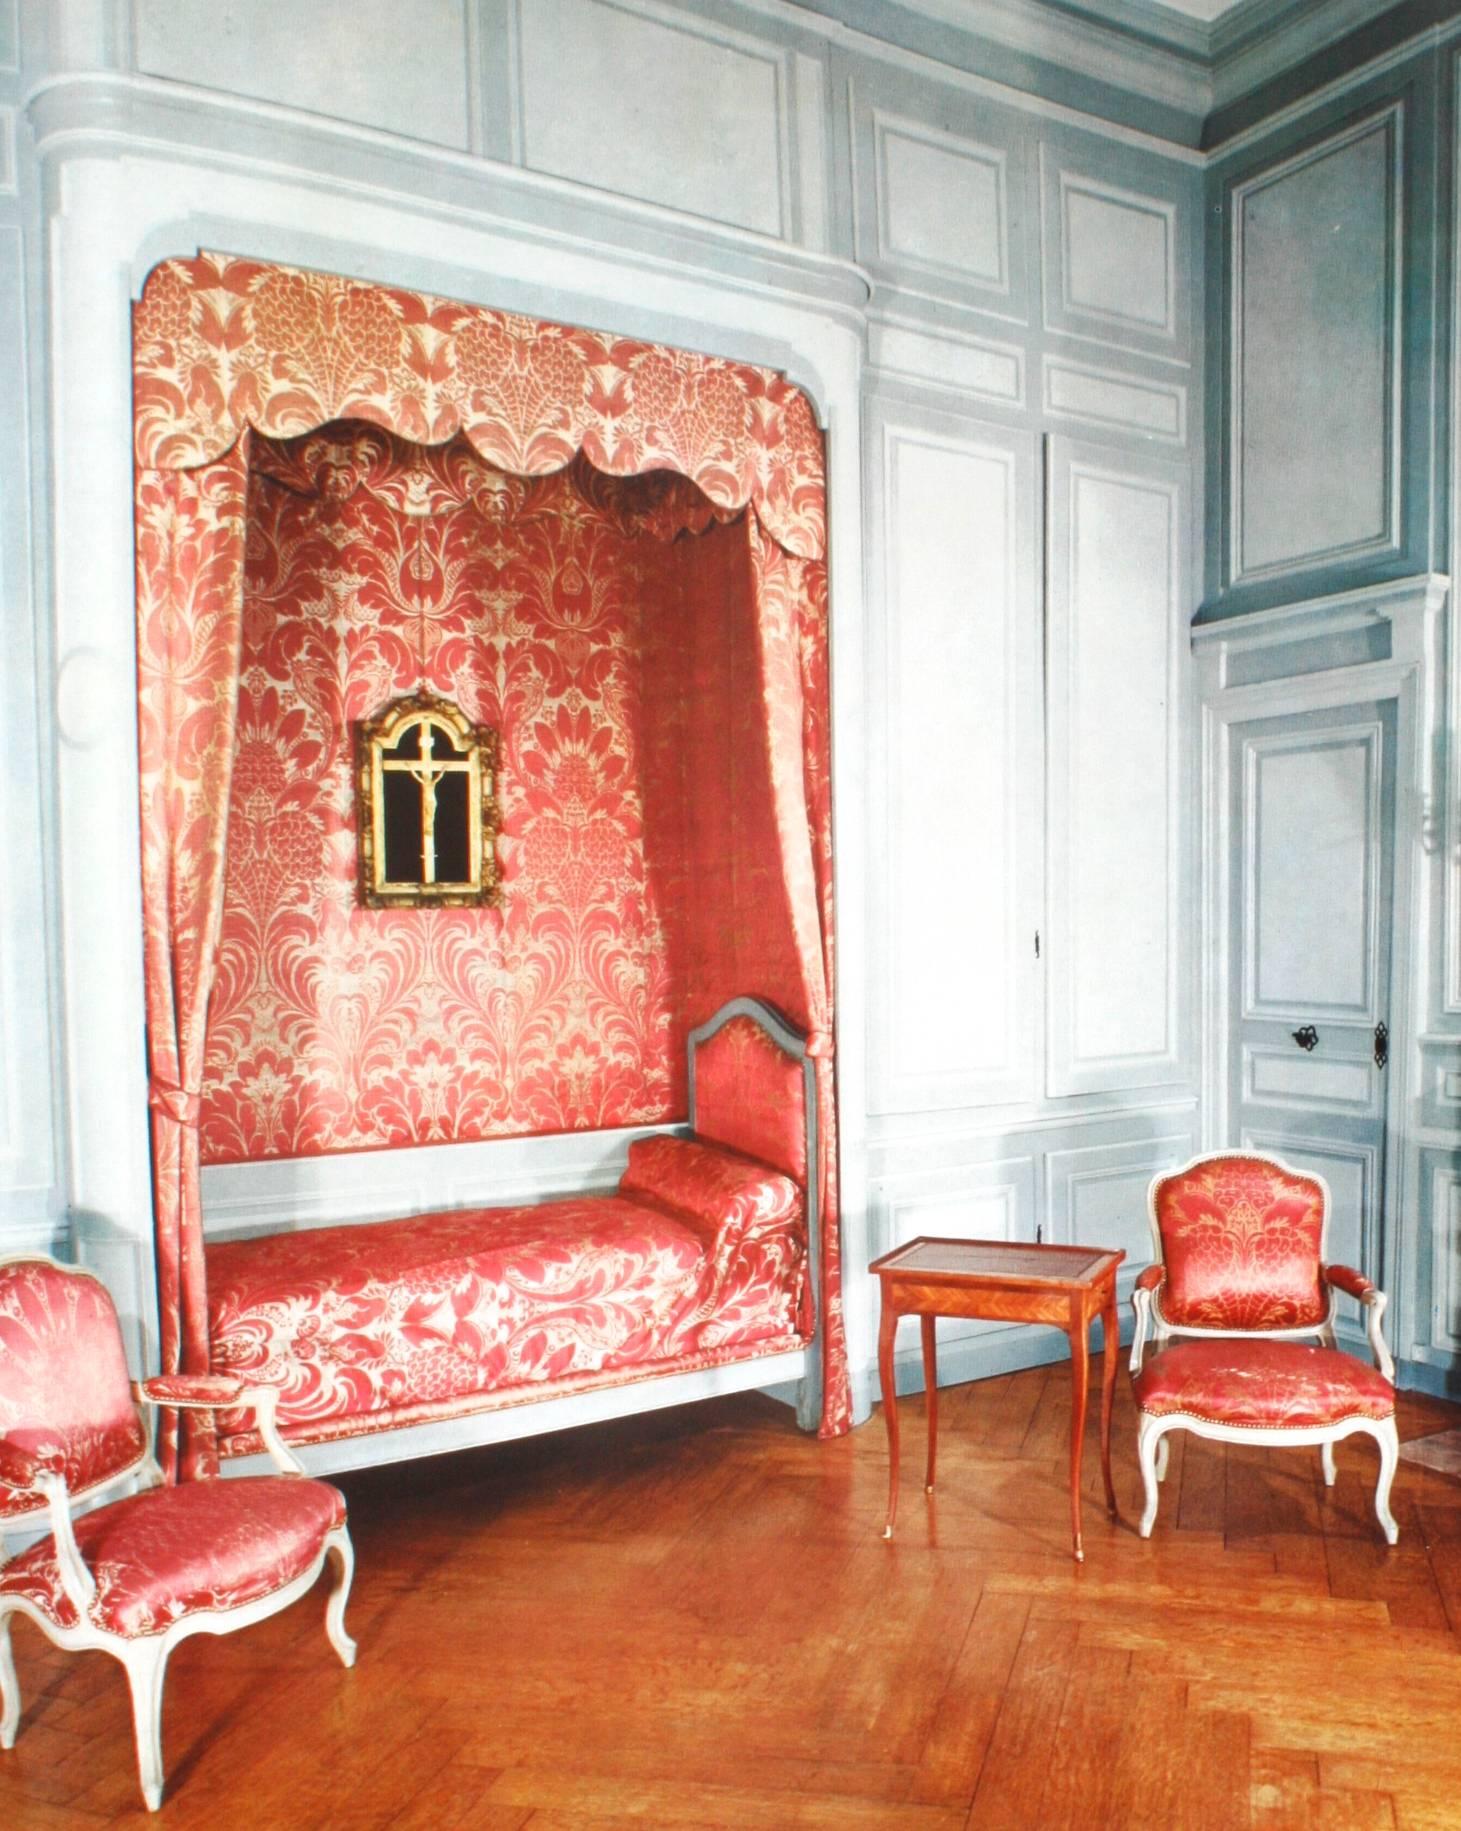 18th Century in France: Society, Decoration, Furniture by Pierre Verlet 4